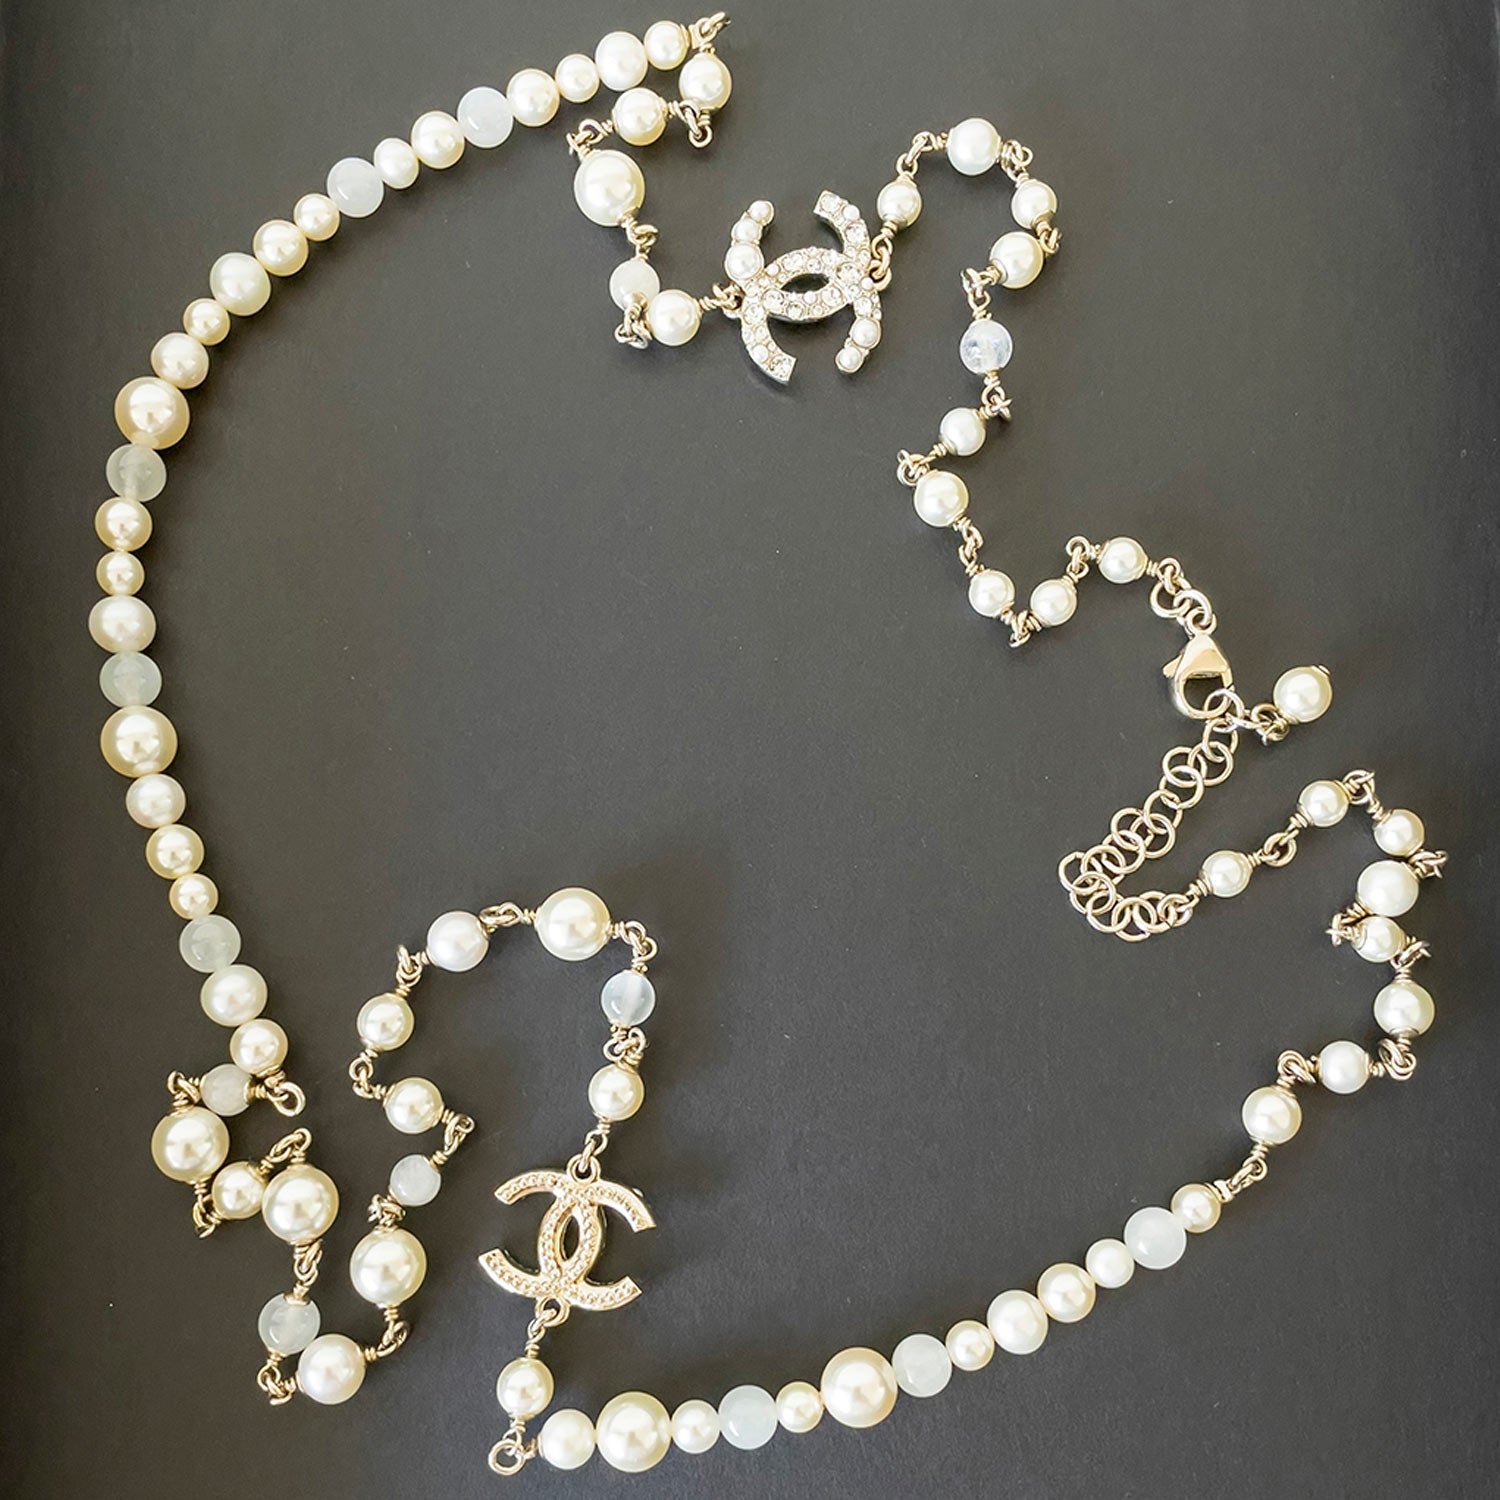 Chanel Faux Pearl Necklace